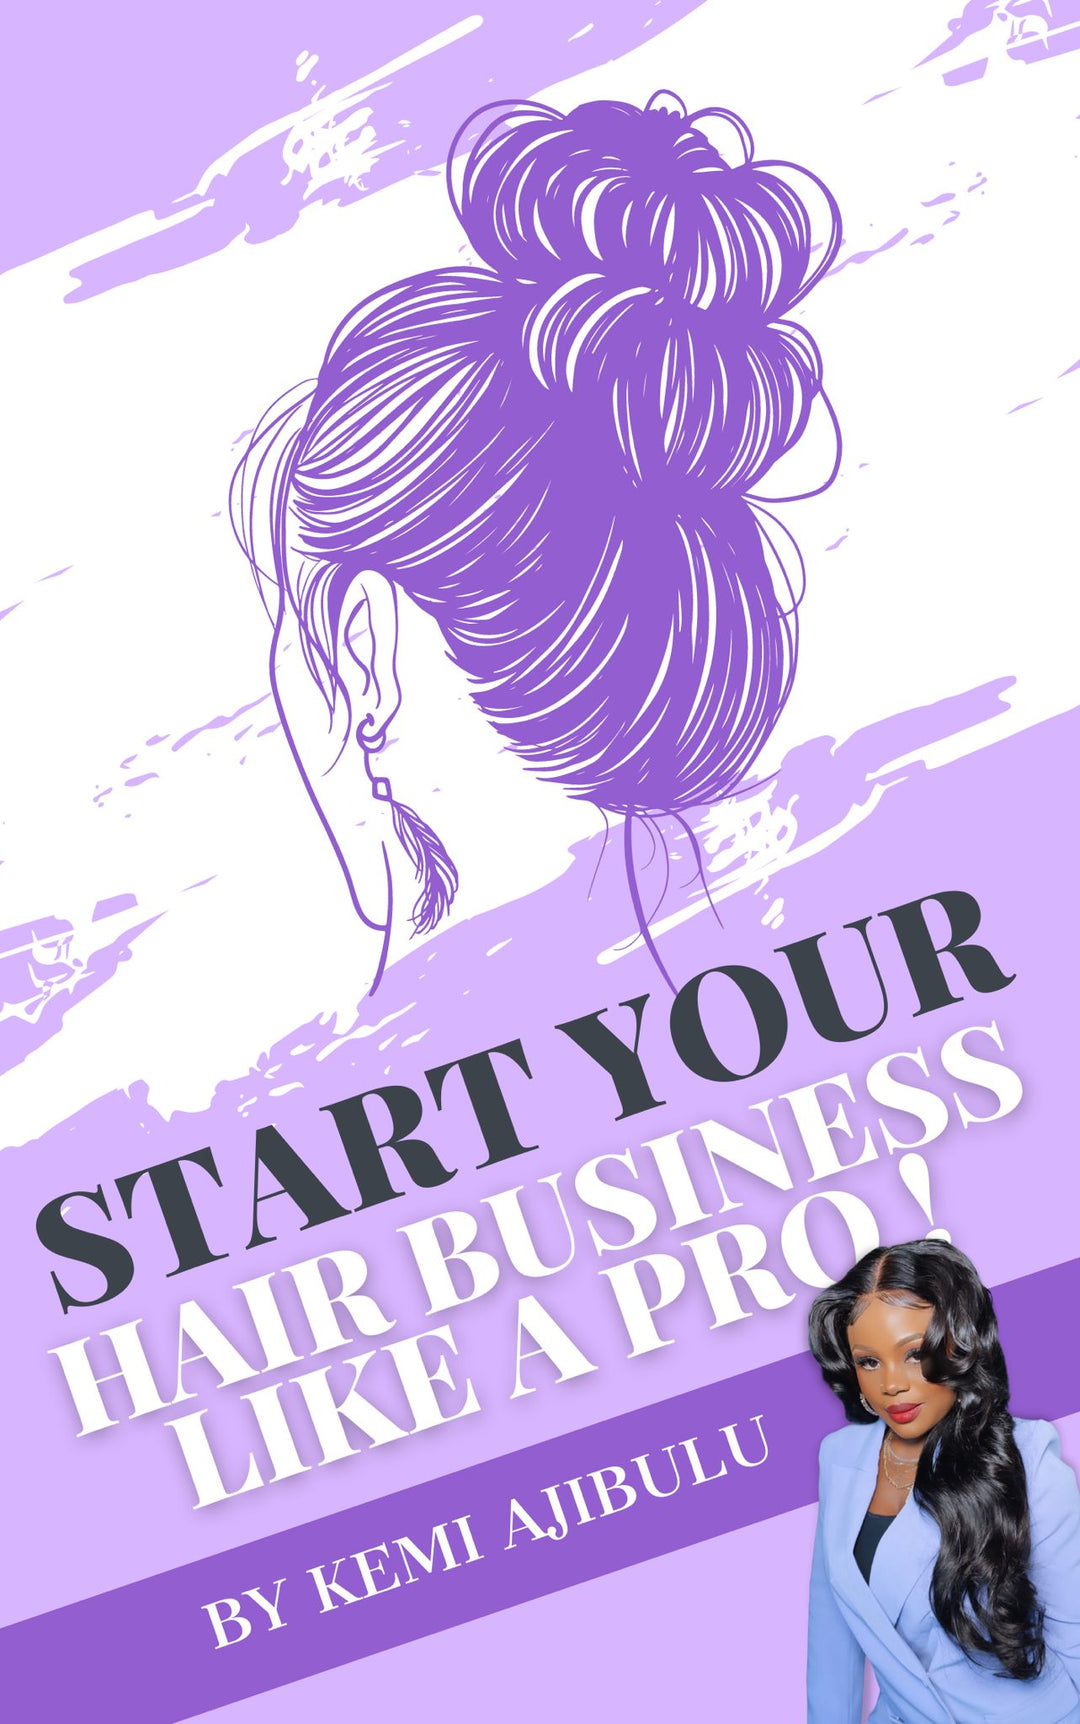 How To Start Your Hair Business Like A Pro ! - Jozelhair